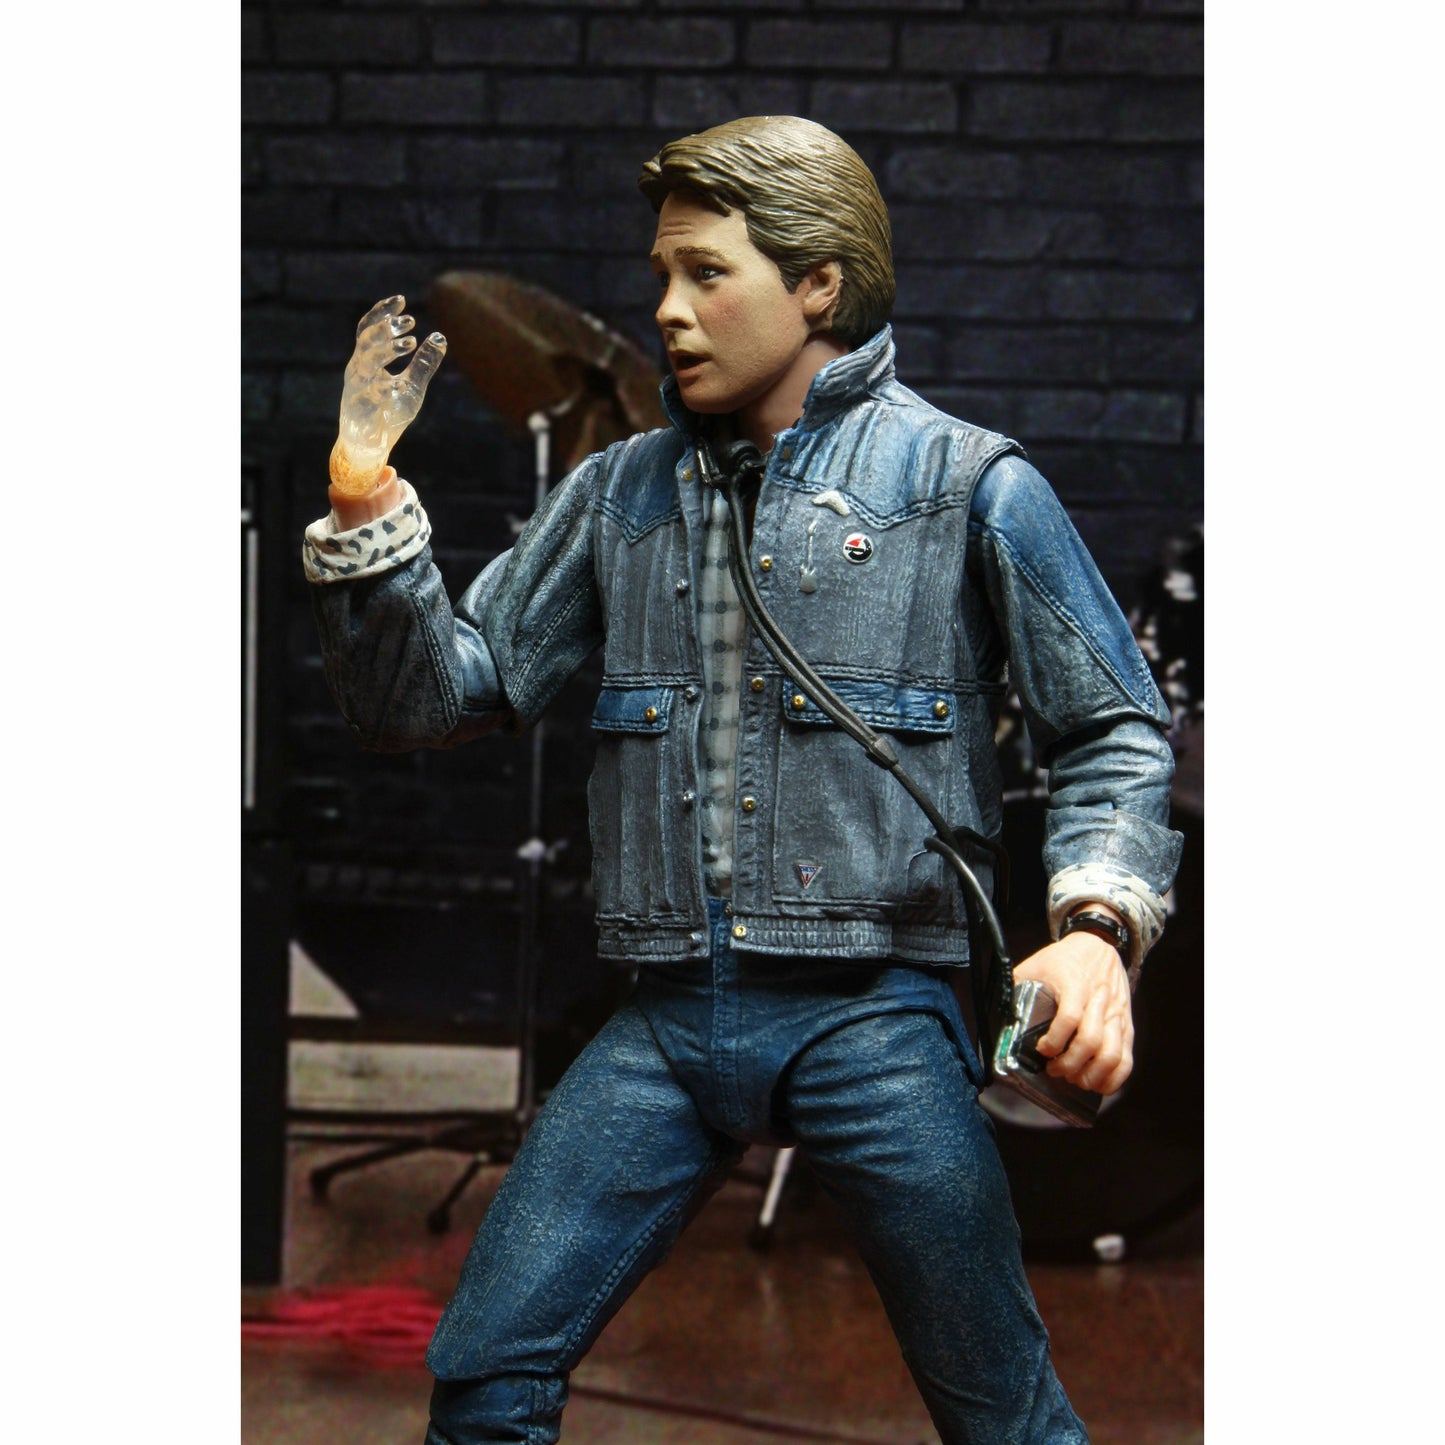 NECA Back to the Future 7" Scale Action Figure - Ultimate Marty McFly (1985 "Audition")